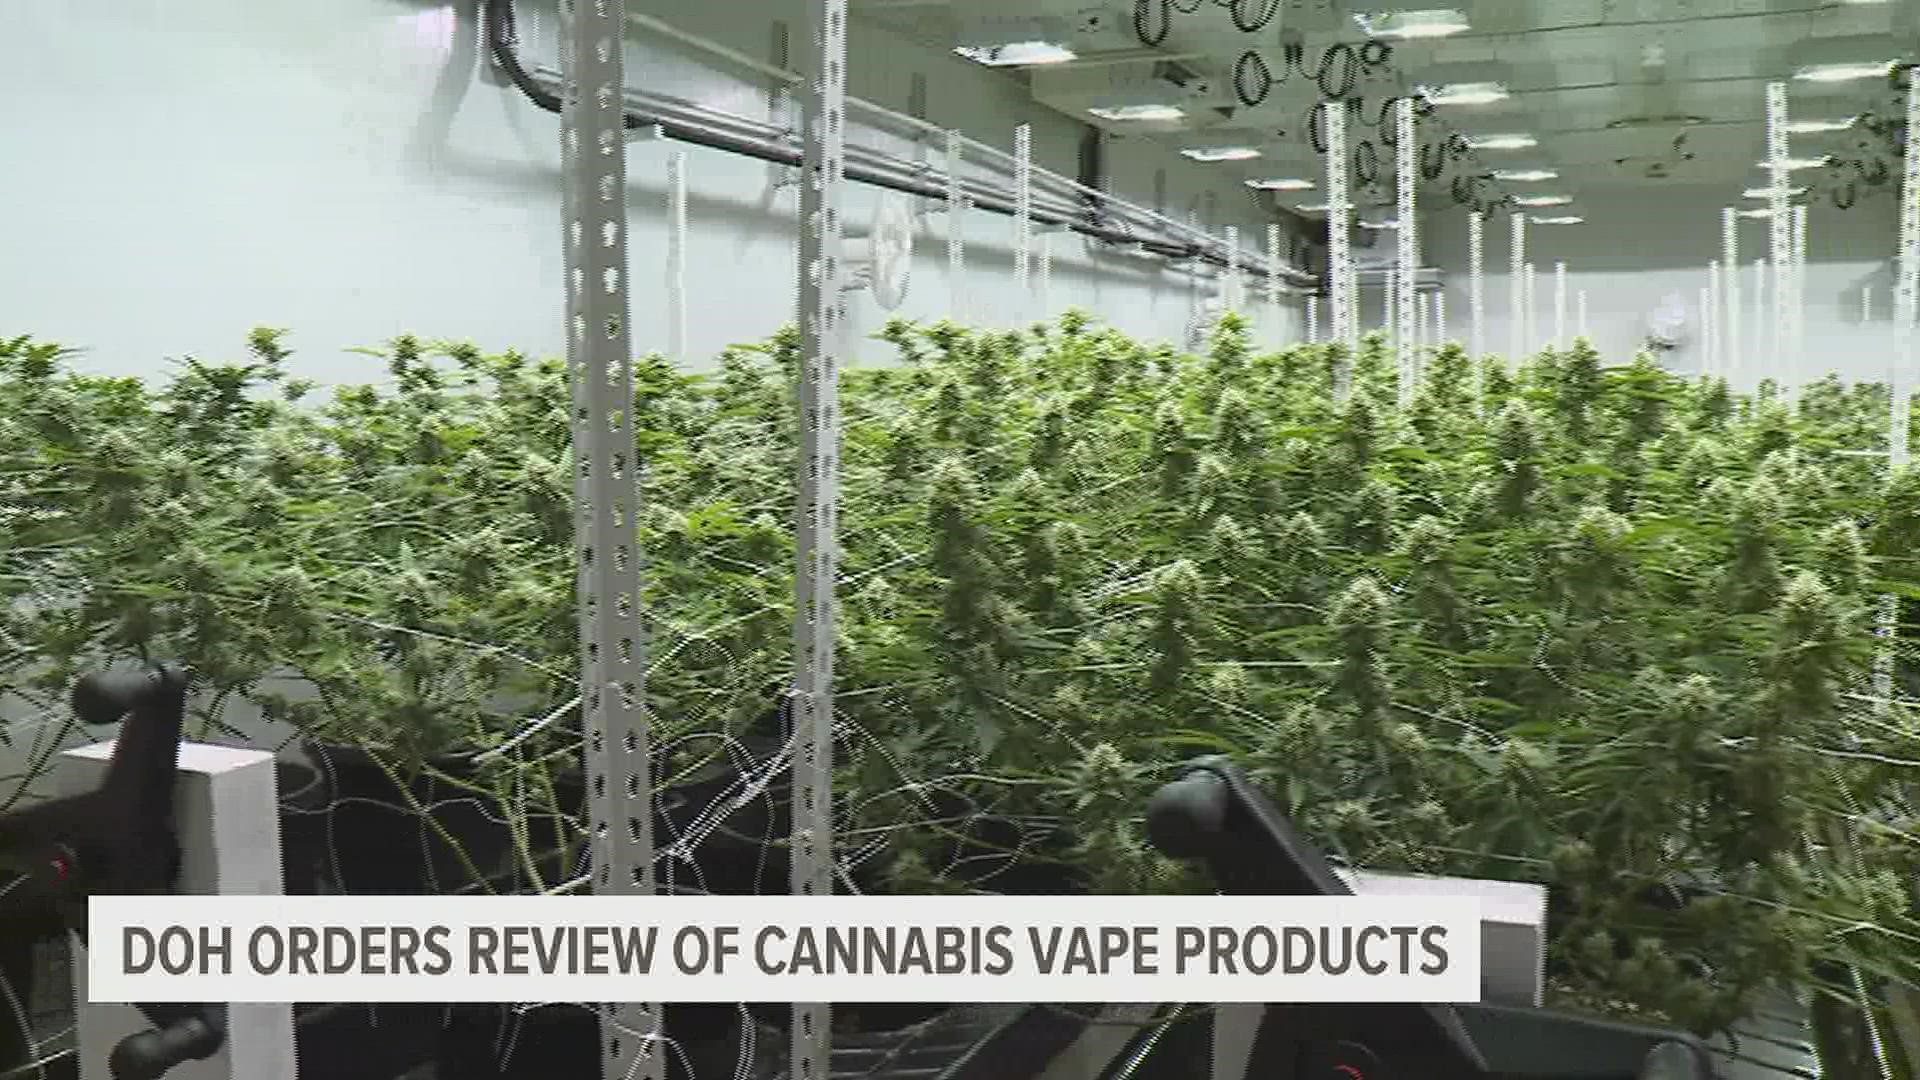 All vaporized medical marijuana products containing additional ingredients will be reviewed, even if they had been previously approved.